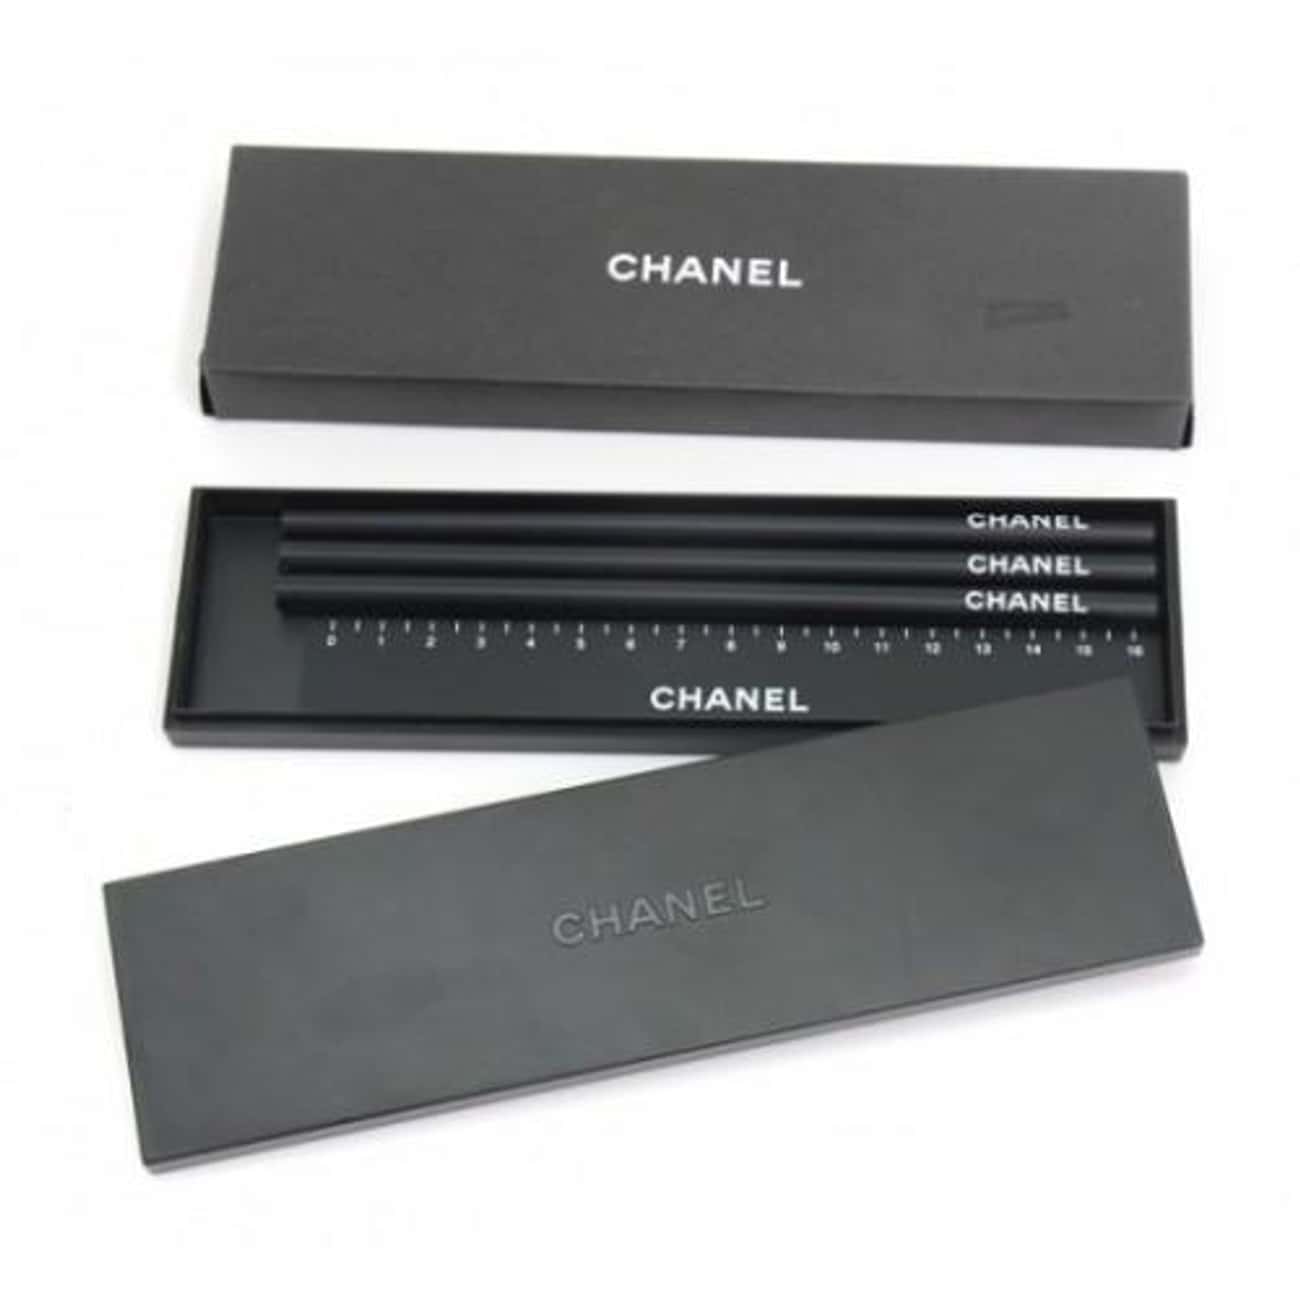 Chanel Pencil Case and Ruler